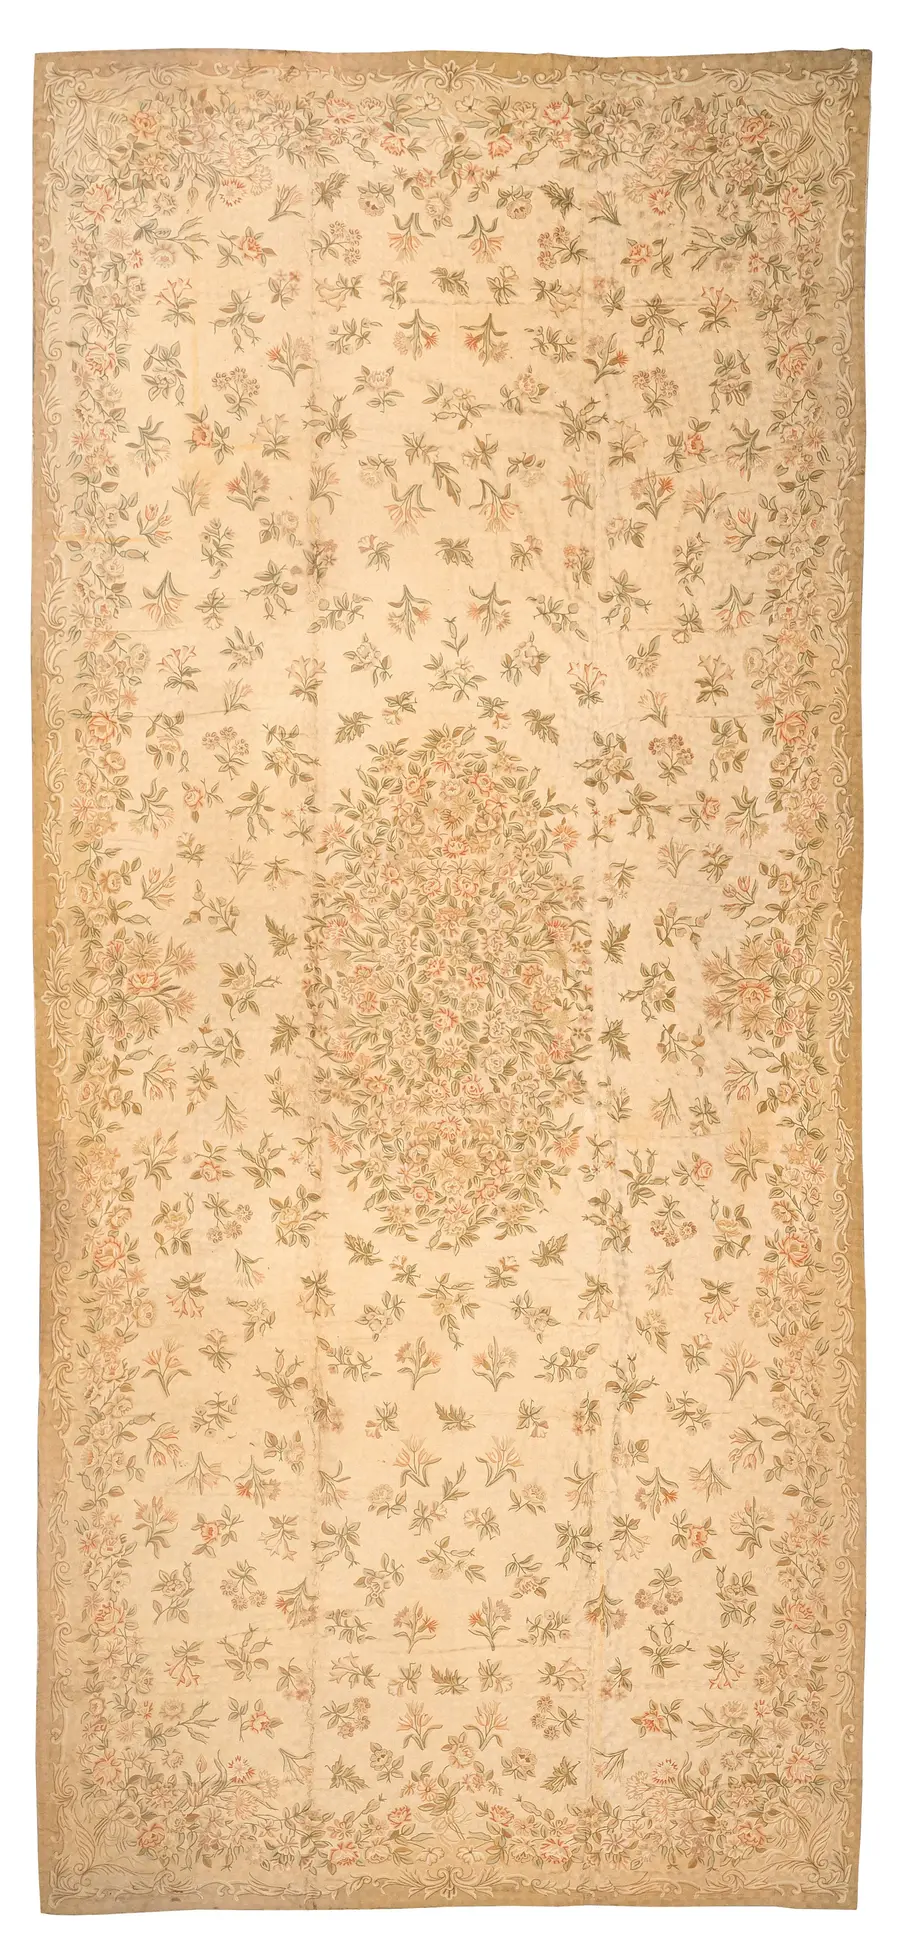 Chainstitch antique rugs and carpets